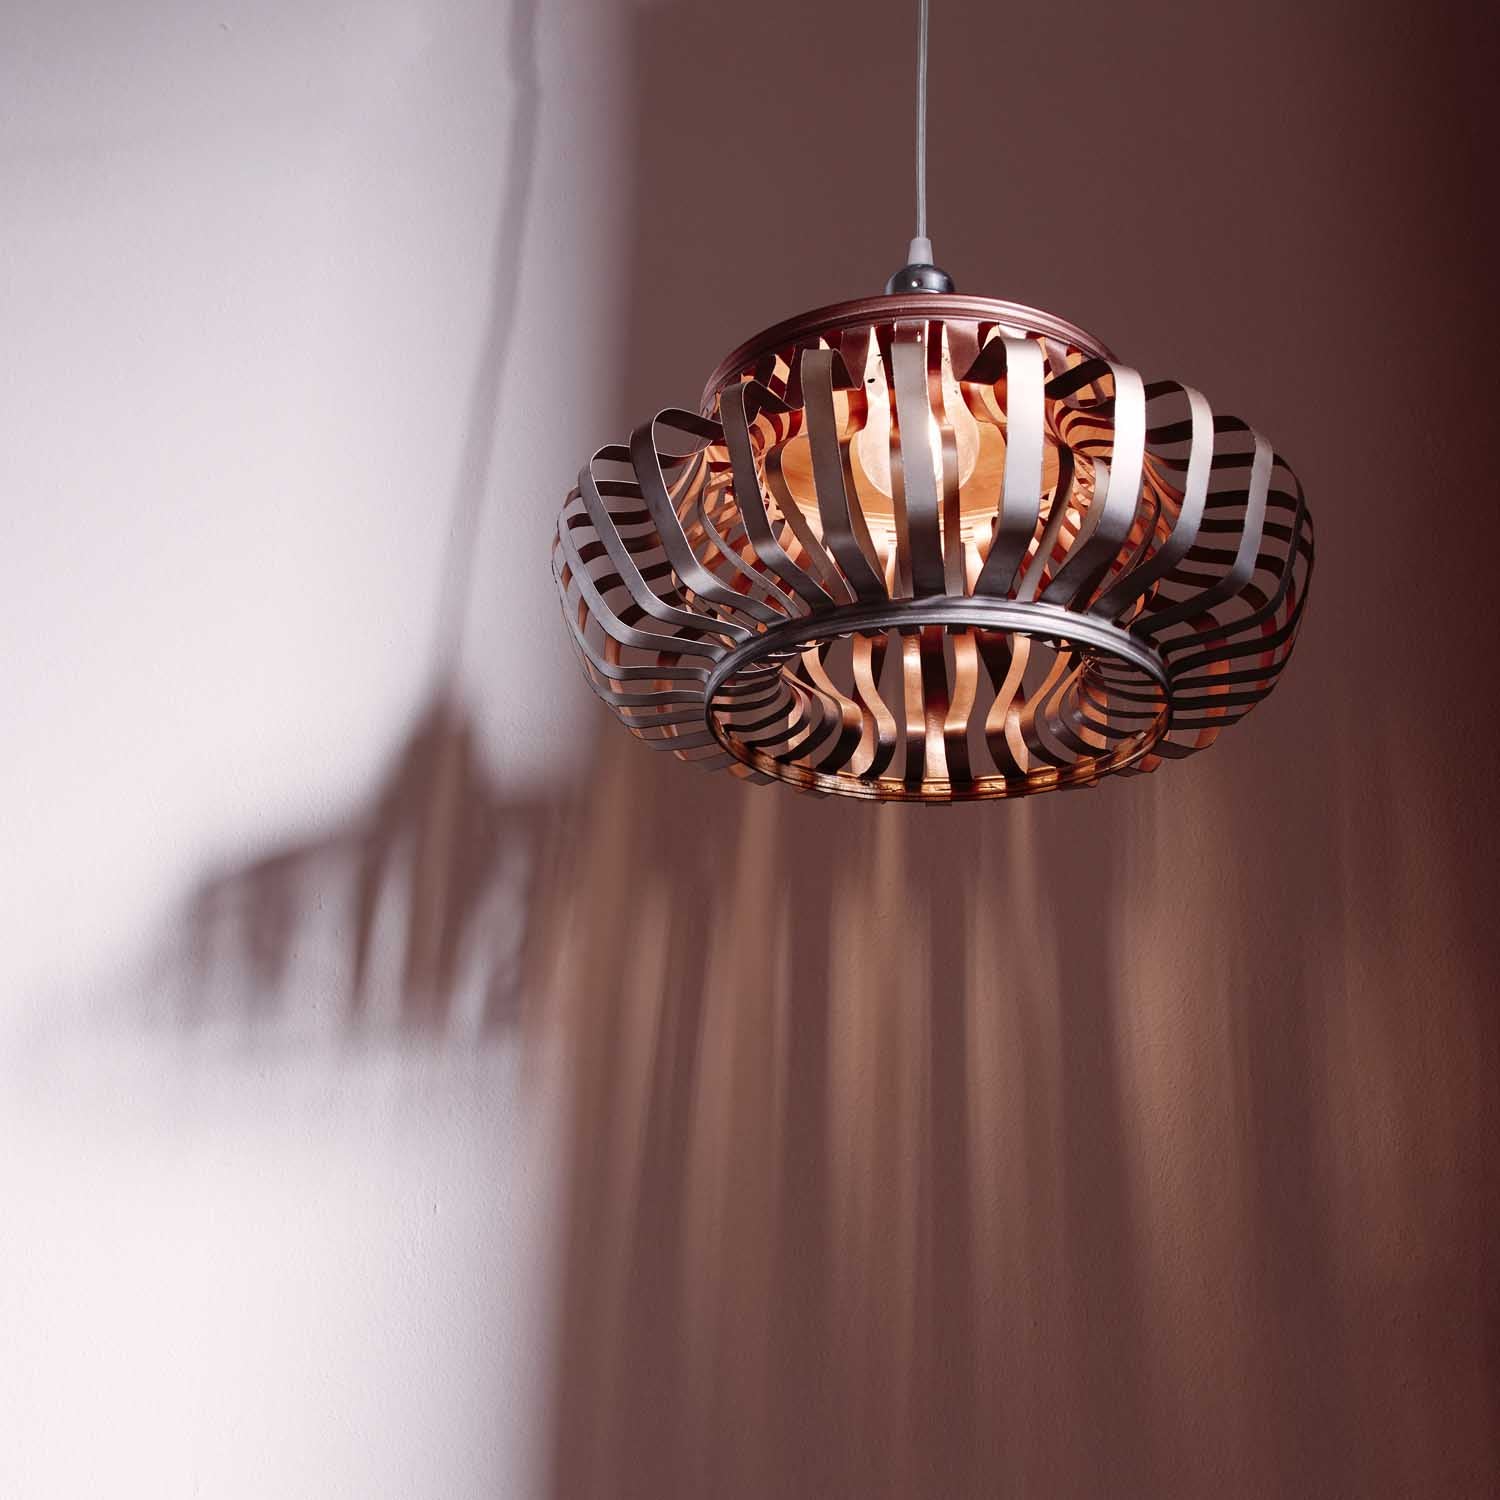 Sustainable ceiling light with silver and copper hues